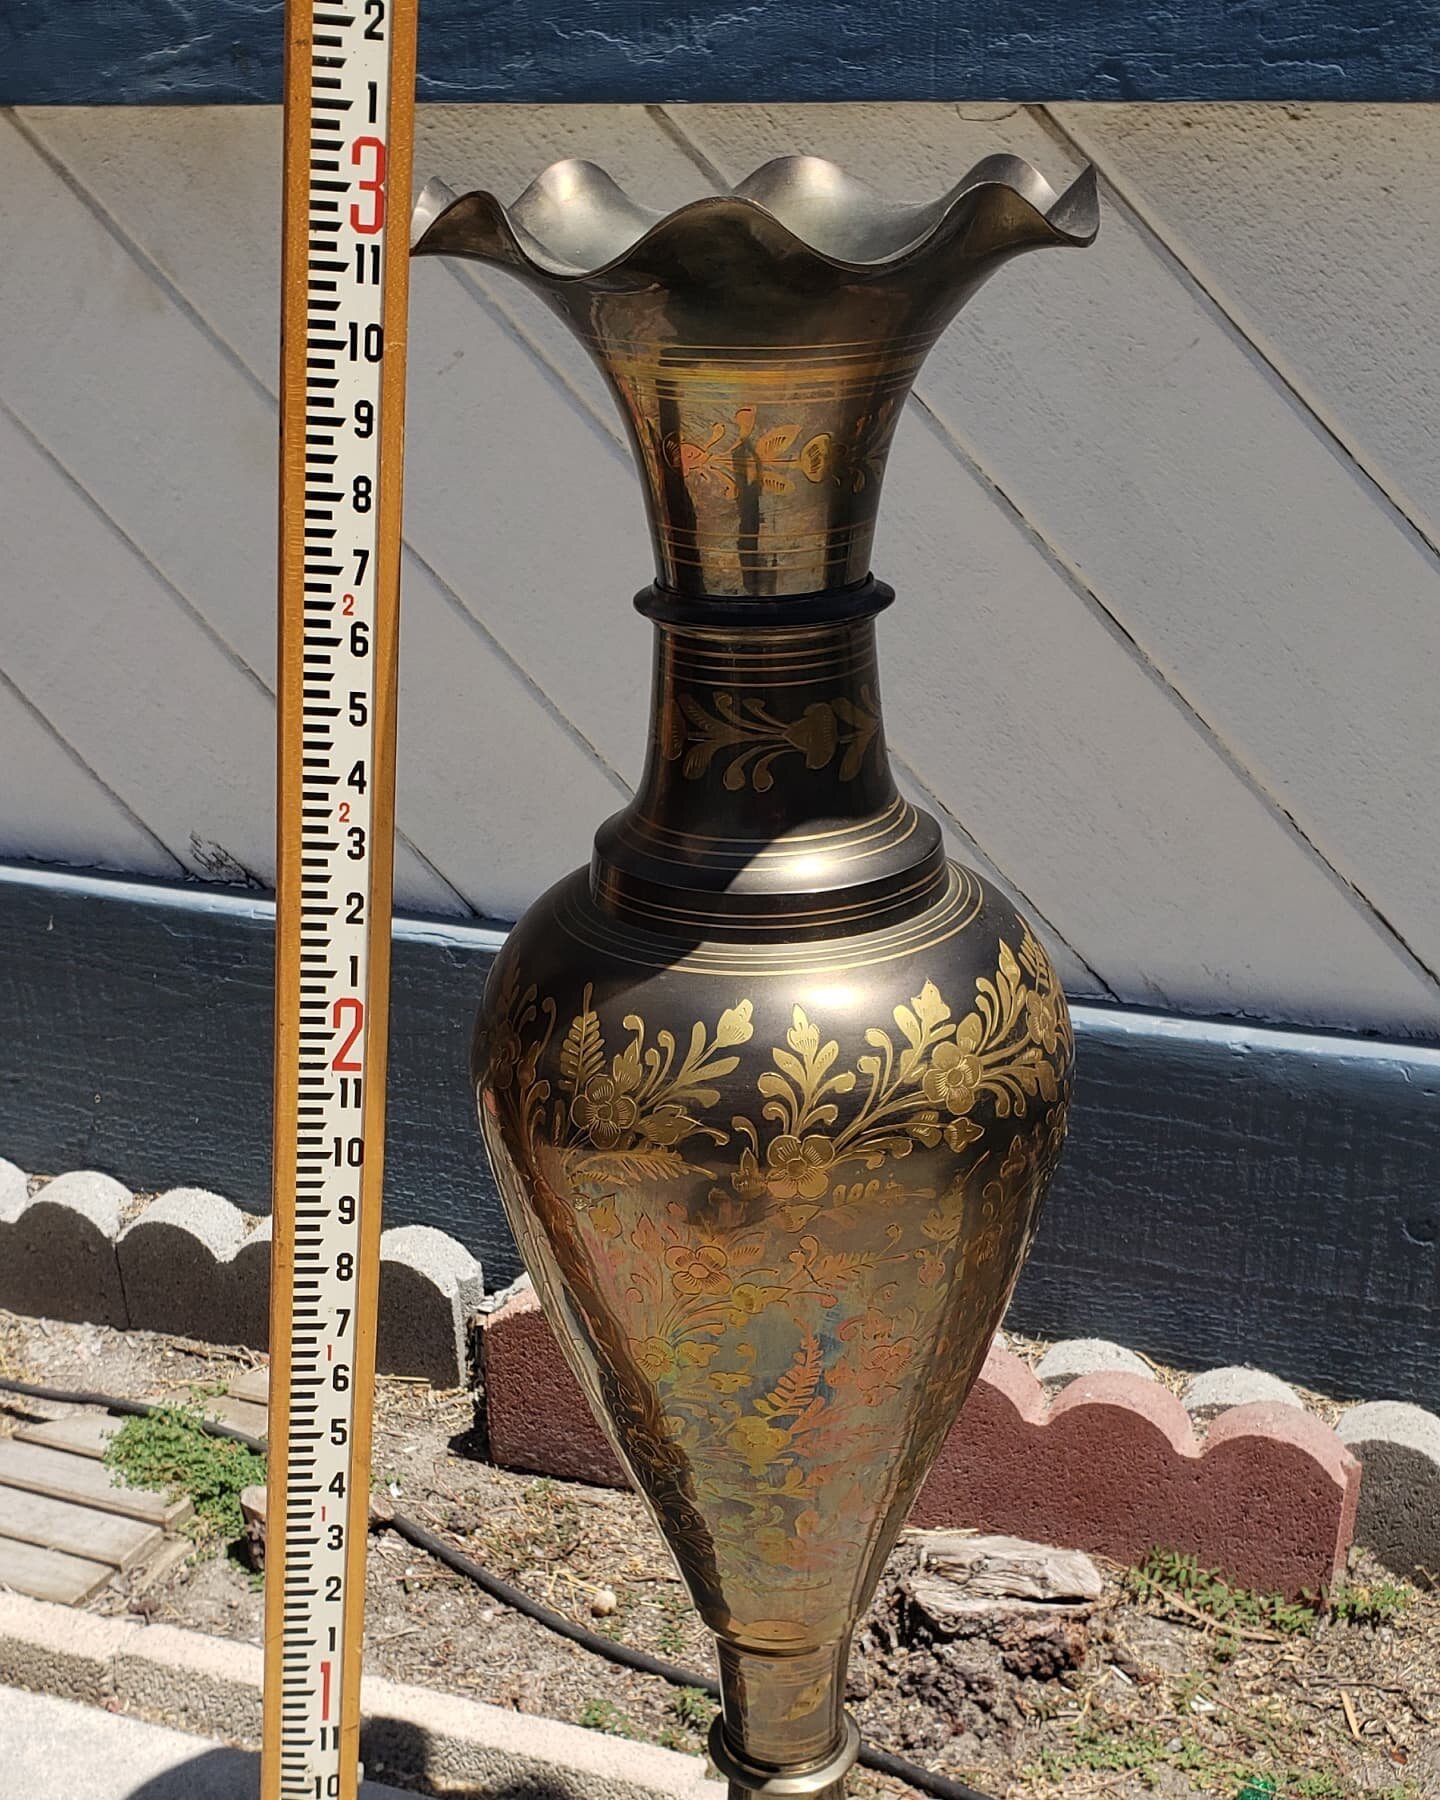 $100. 3 foot tall brass copper flower vase Moroccan Bohemian Style Etched
indian decor, large tall vintage boho unique,  interior decor, India artisan craft eclectic. ENGRAVED FLOOR VASE LEAF FLORAL DECO. 
Plus tax.
This item is located in my Antique